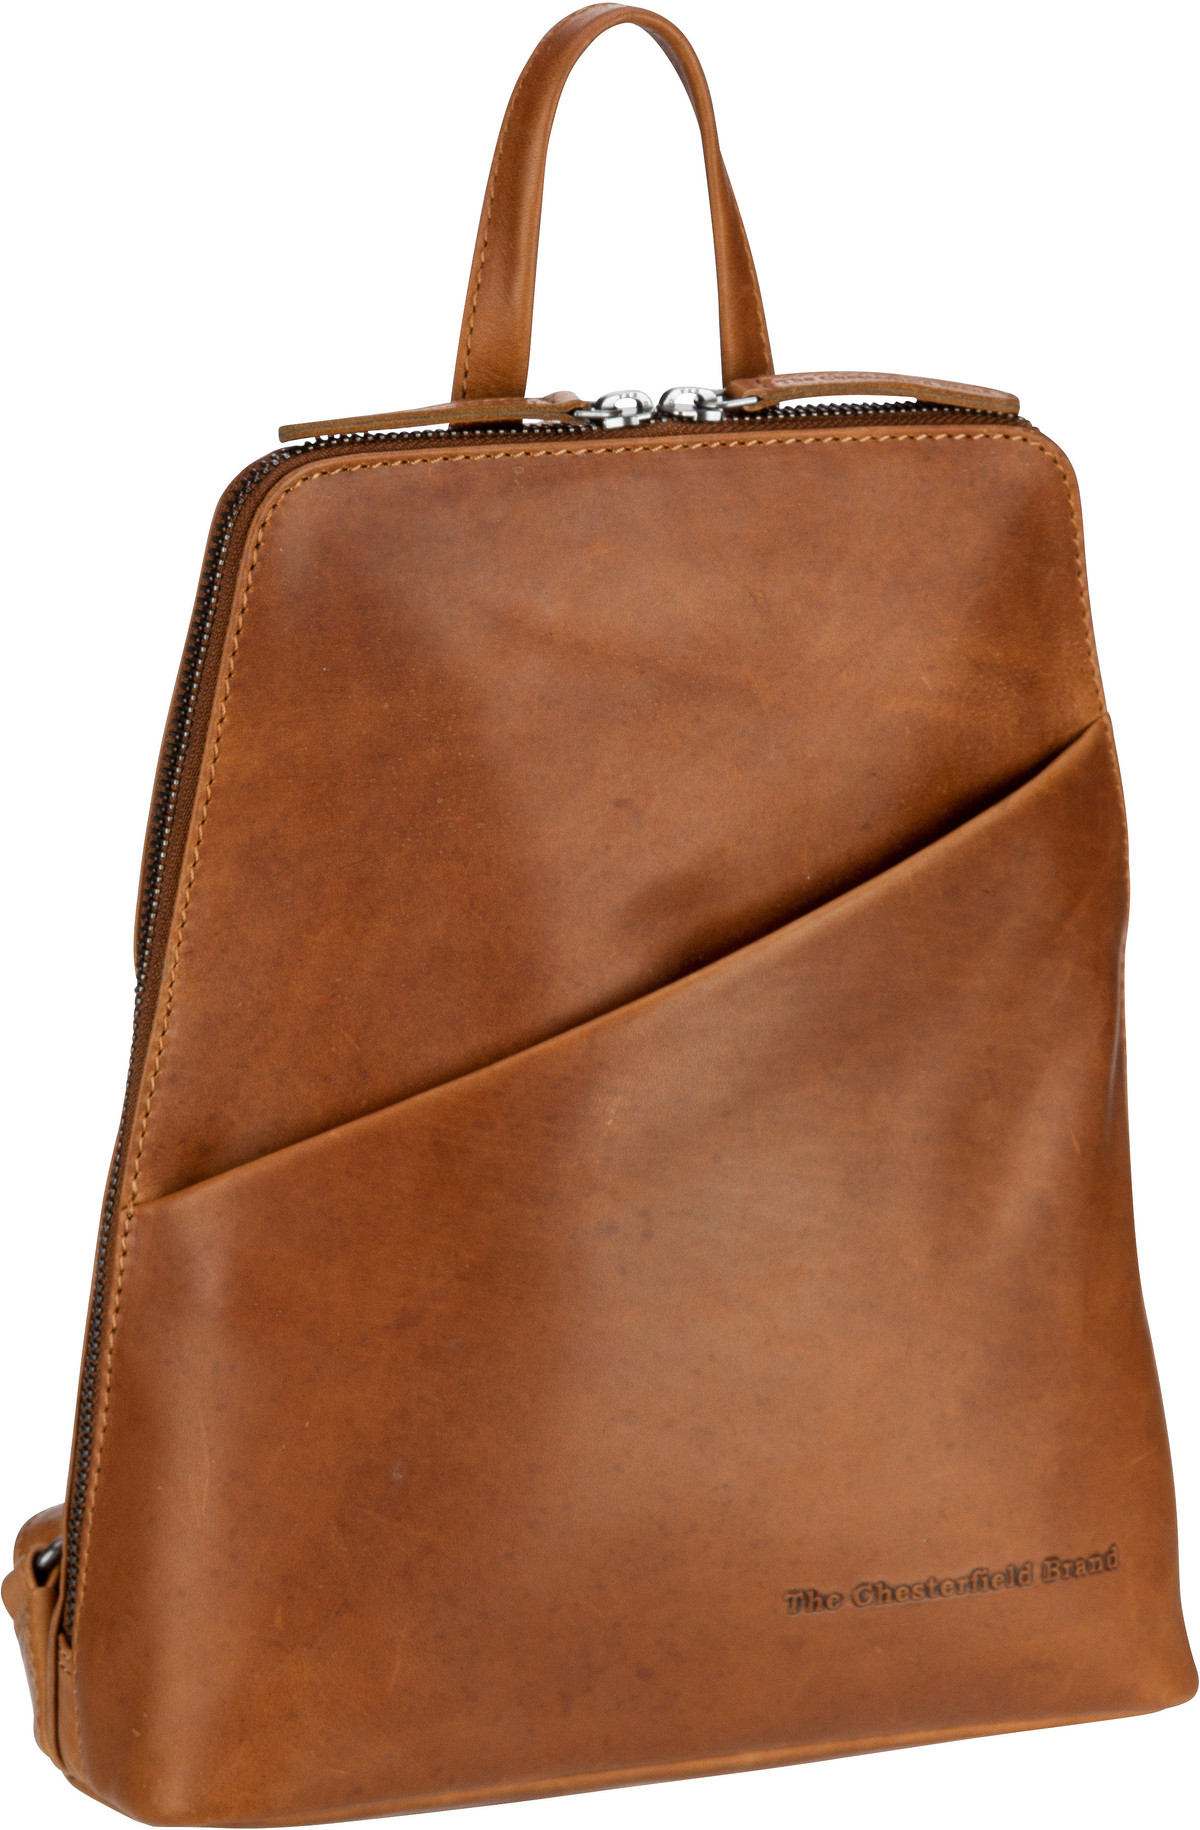 the chesterfield brand -  Rucksack / Daypack Claire 0235 Cognac (7 Liter)